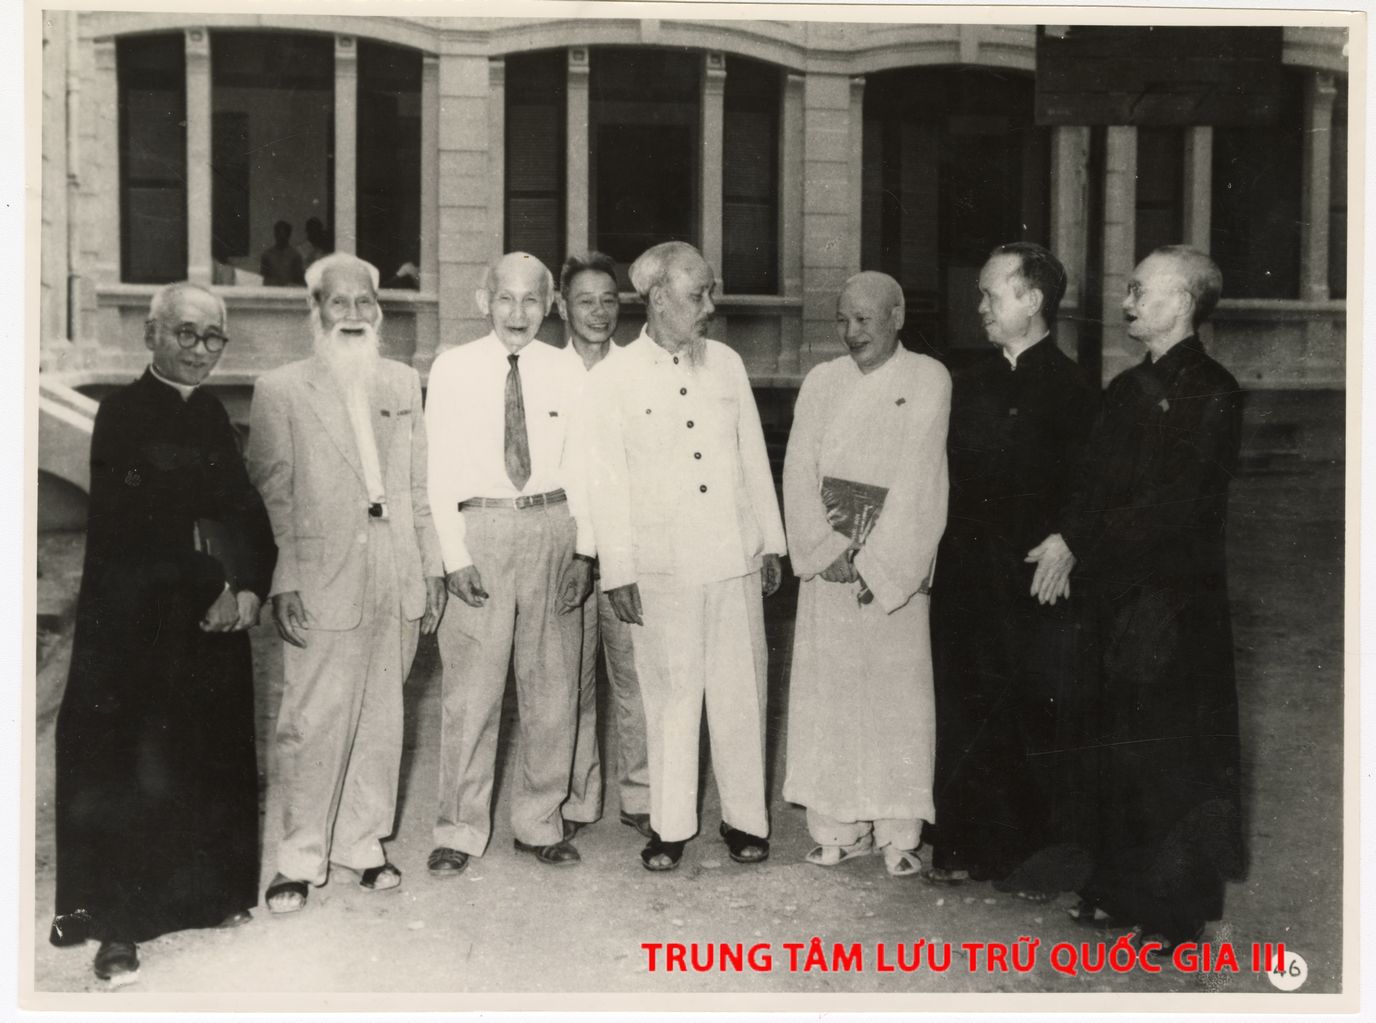 President Ho Chi Minh talking to religious delegates in the DRV National Assembly, 1960. Courtesy of the Vietnam National Archives Center III, Hanoi.